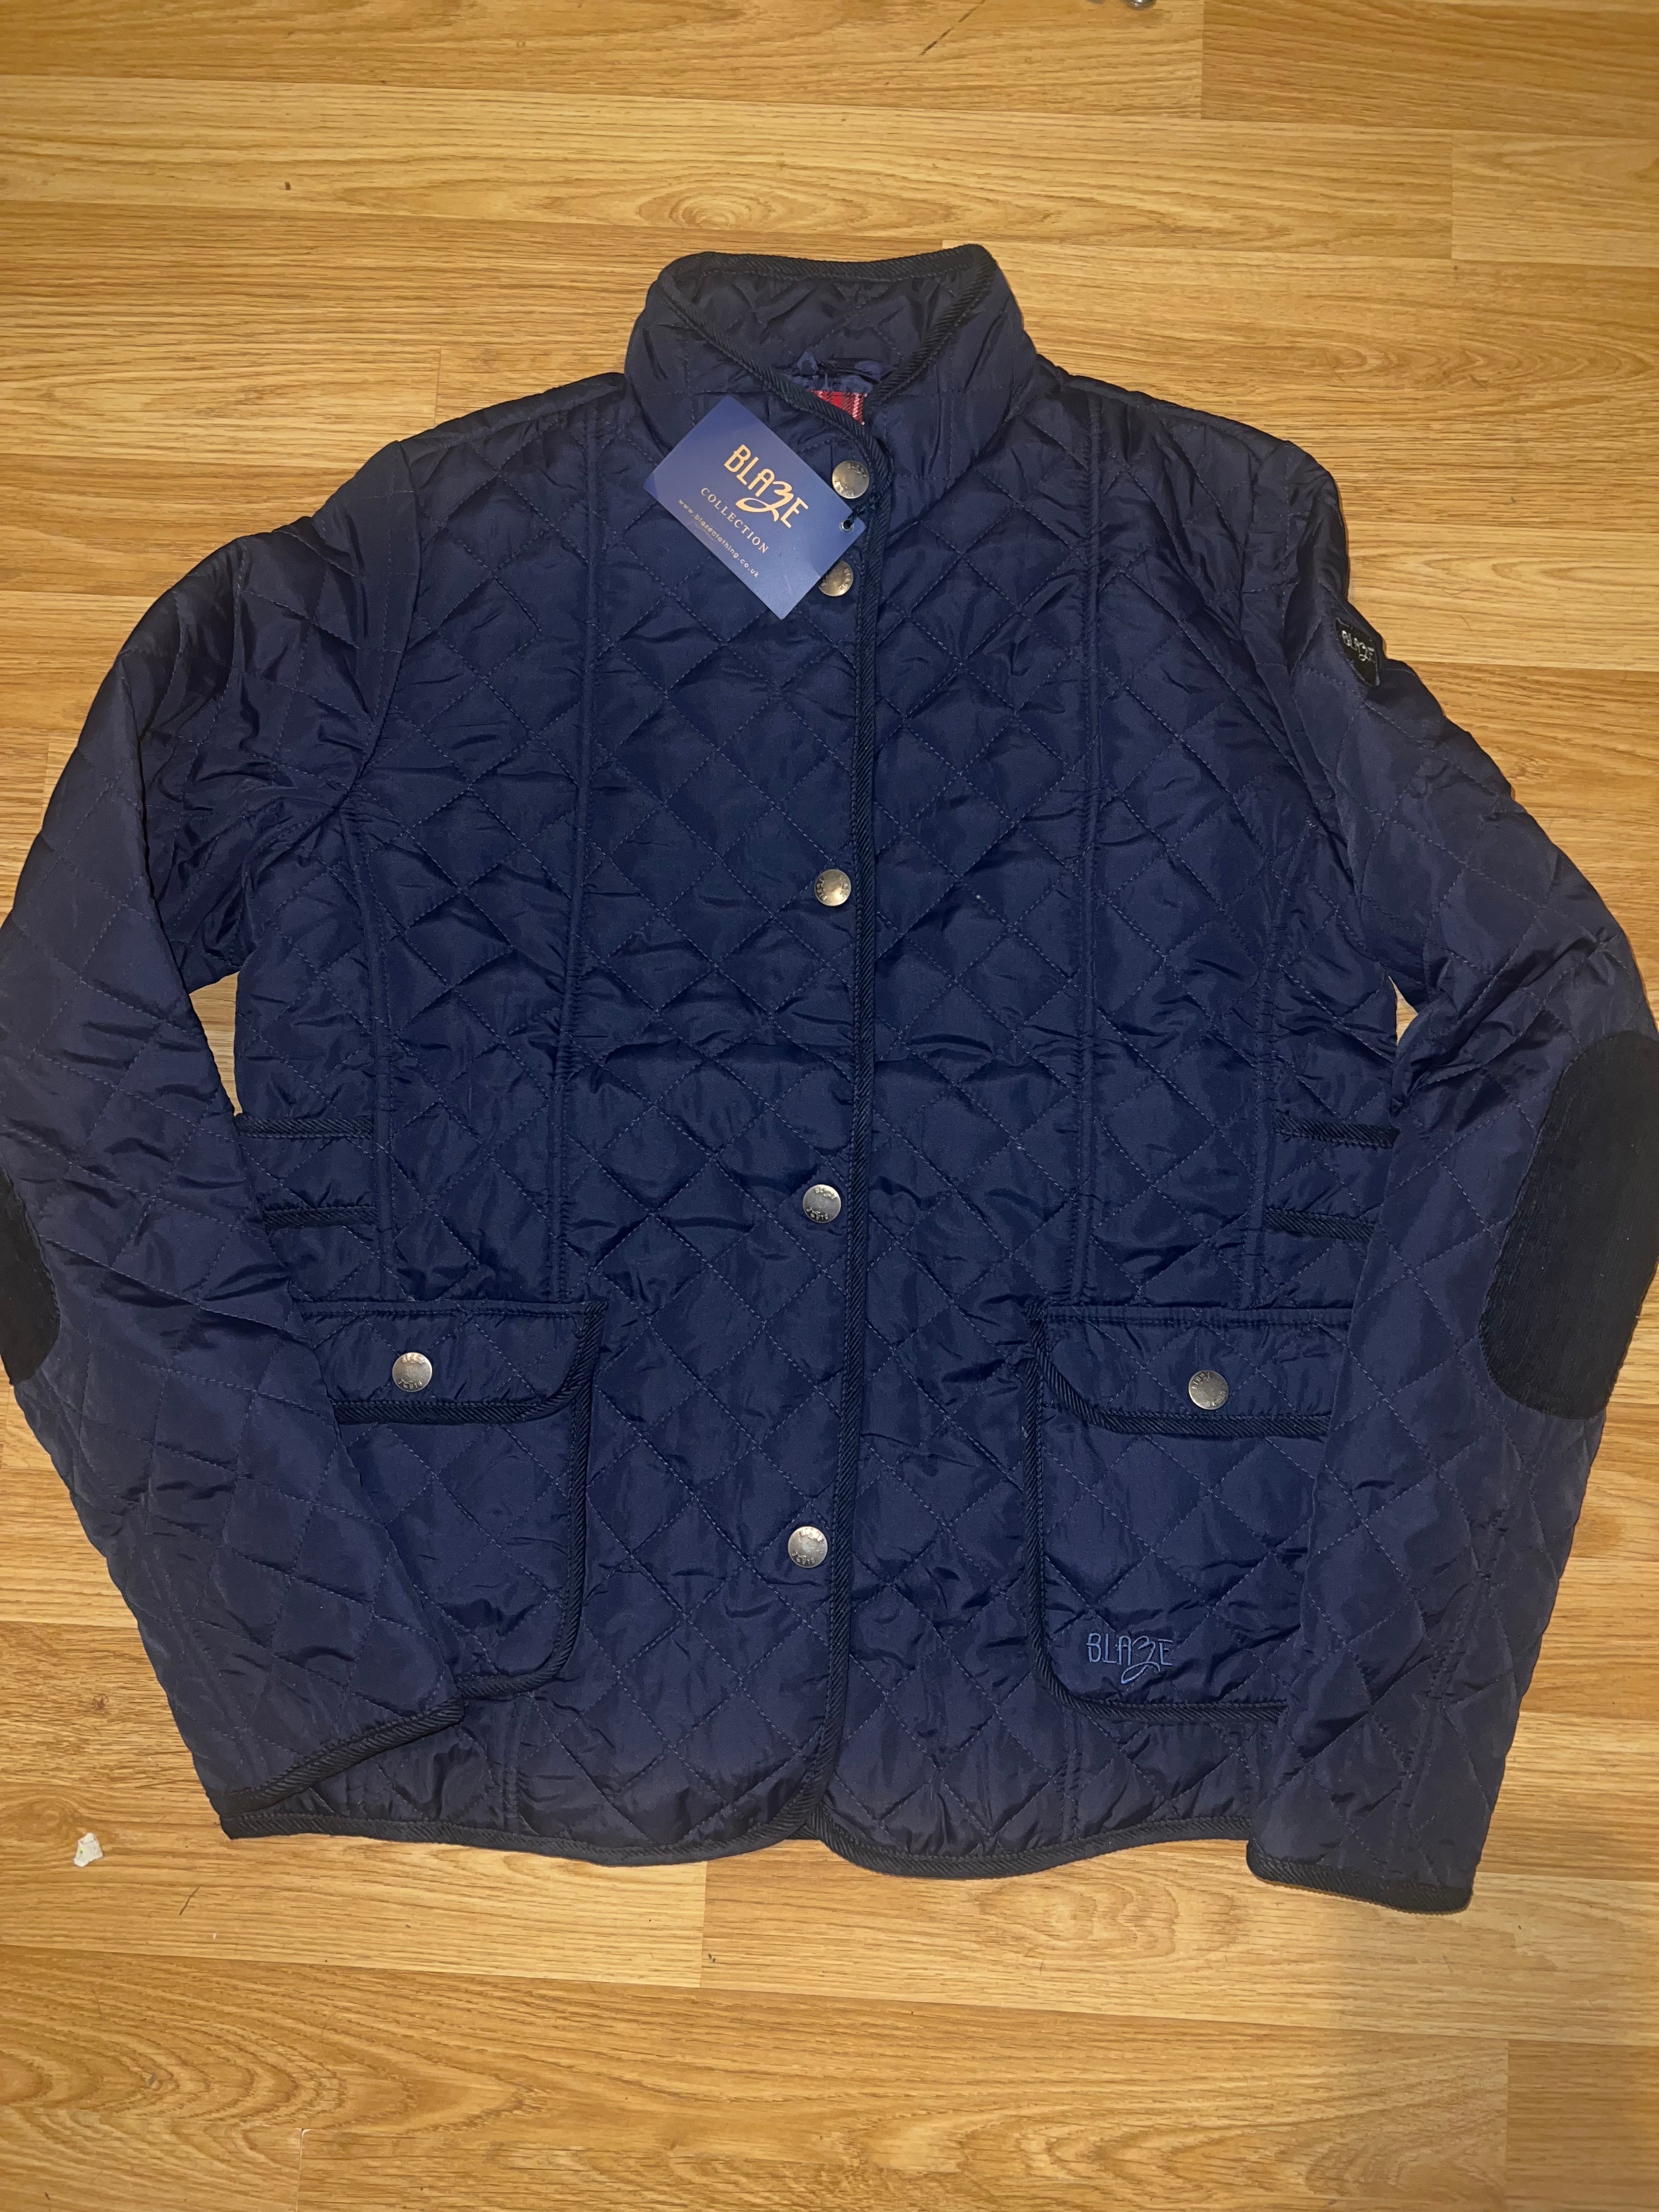 Blaze Quilted Country Jacket - Size 10 or 14